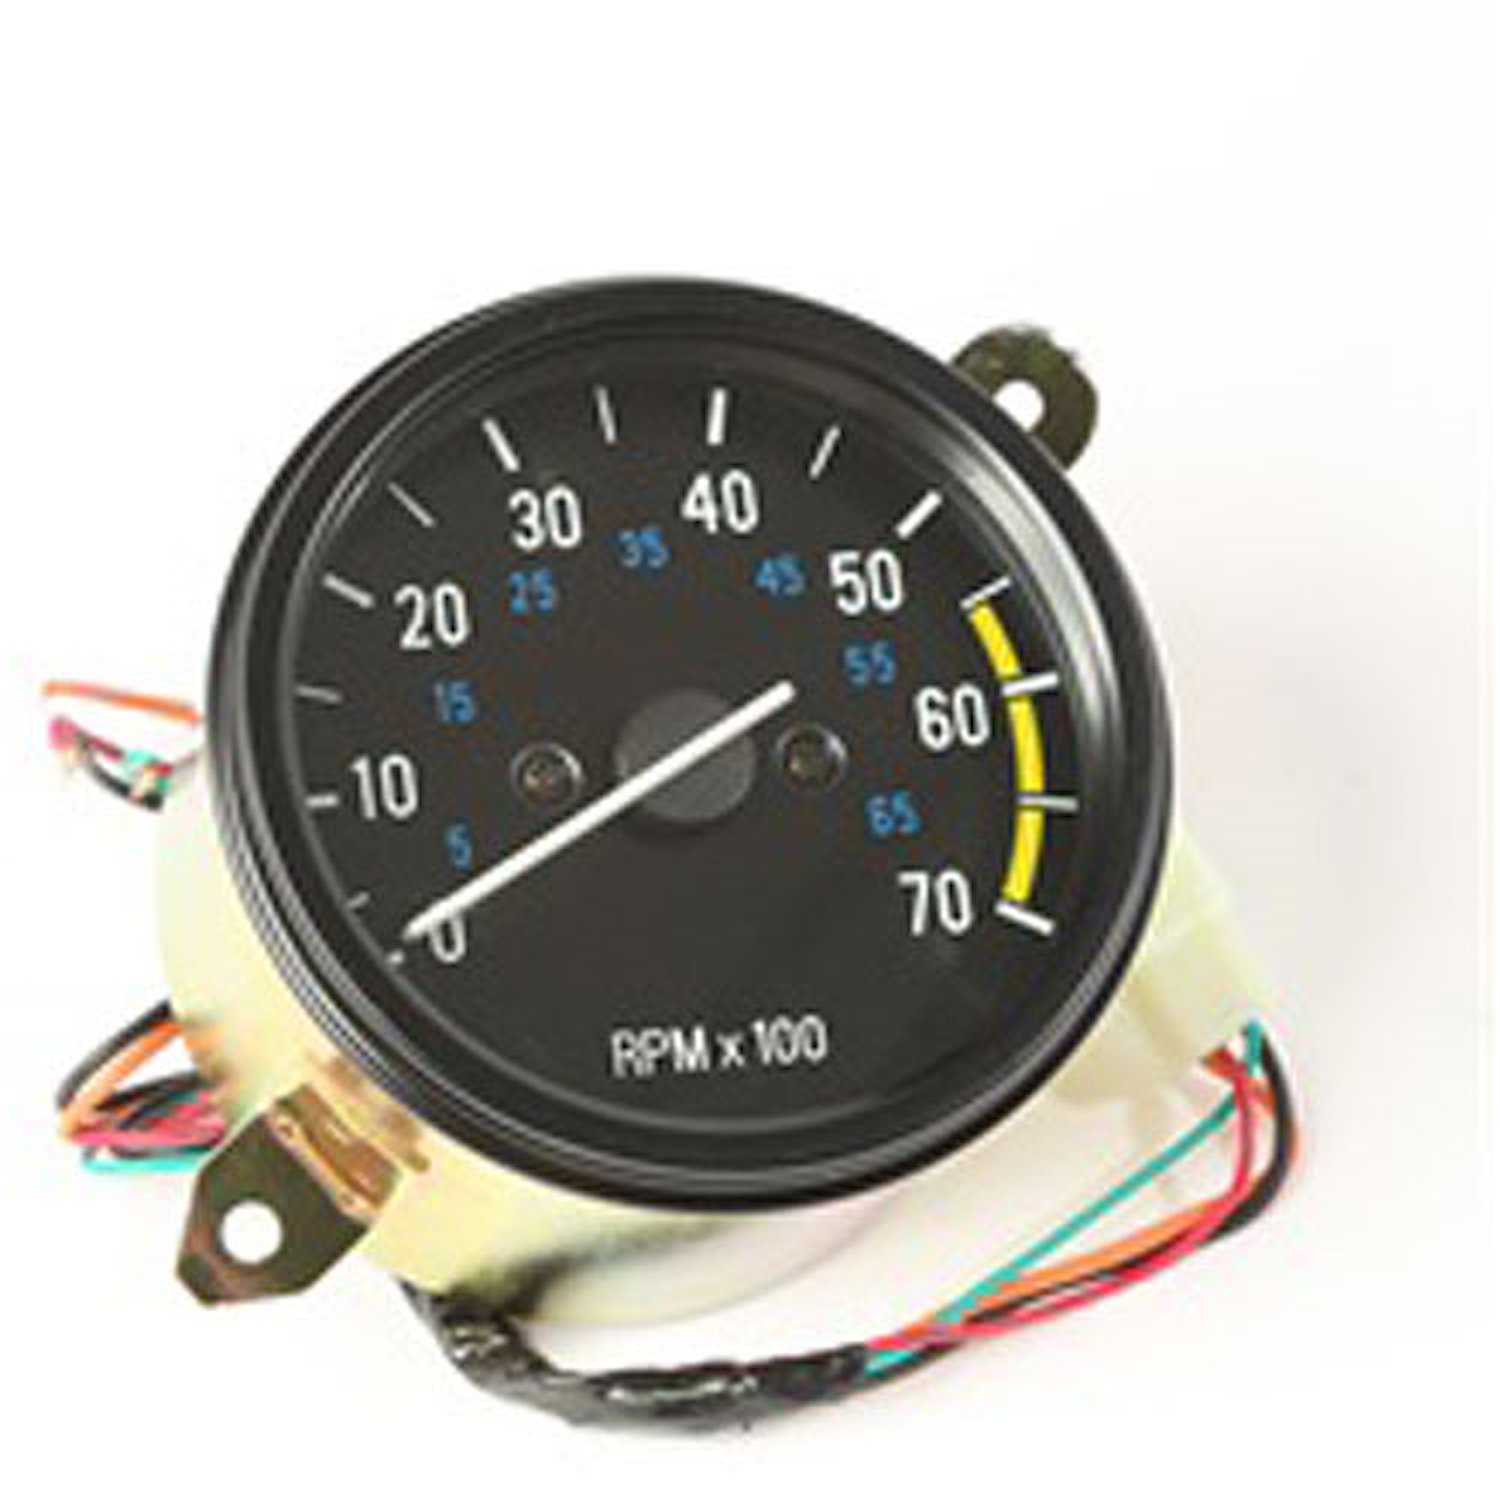 Replacement tachometer from Omix-ADA, Fits 87-91 Jeep Wranglers with a 4.2L or 4.0L engine.